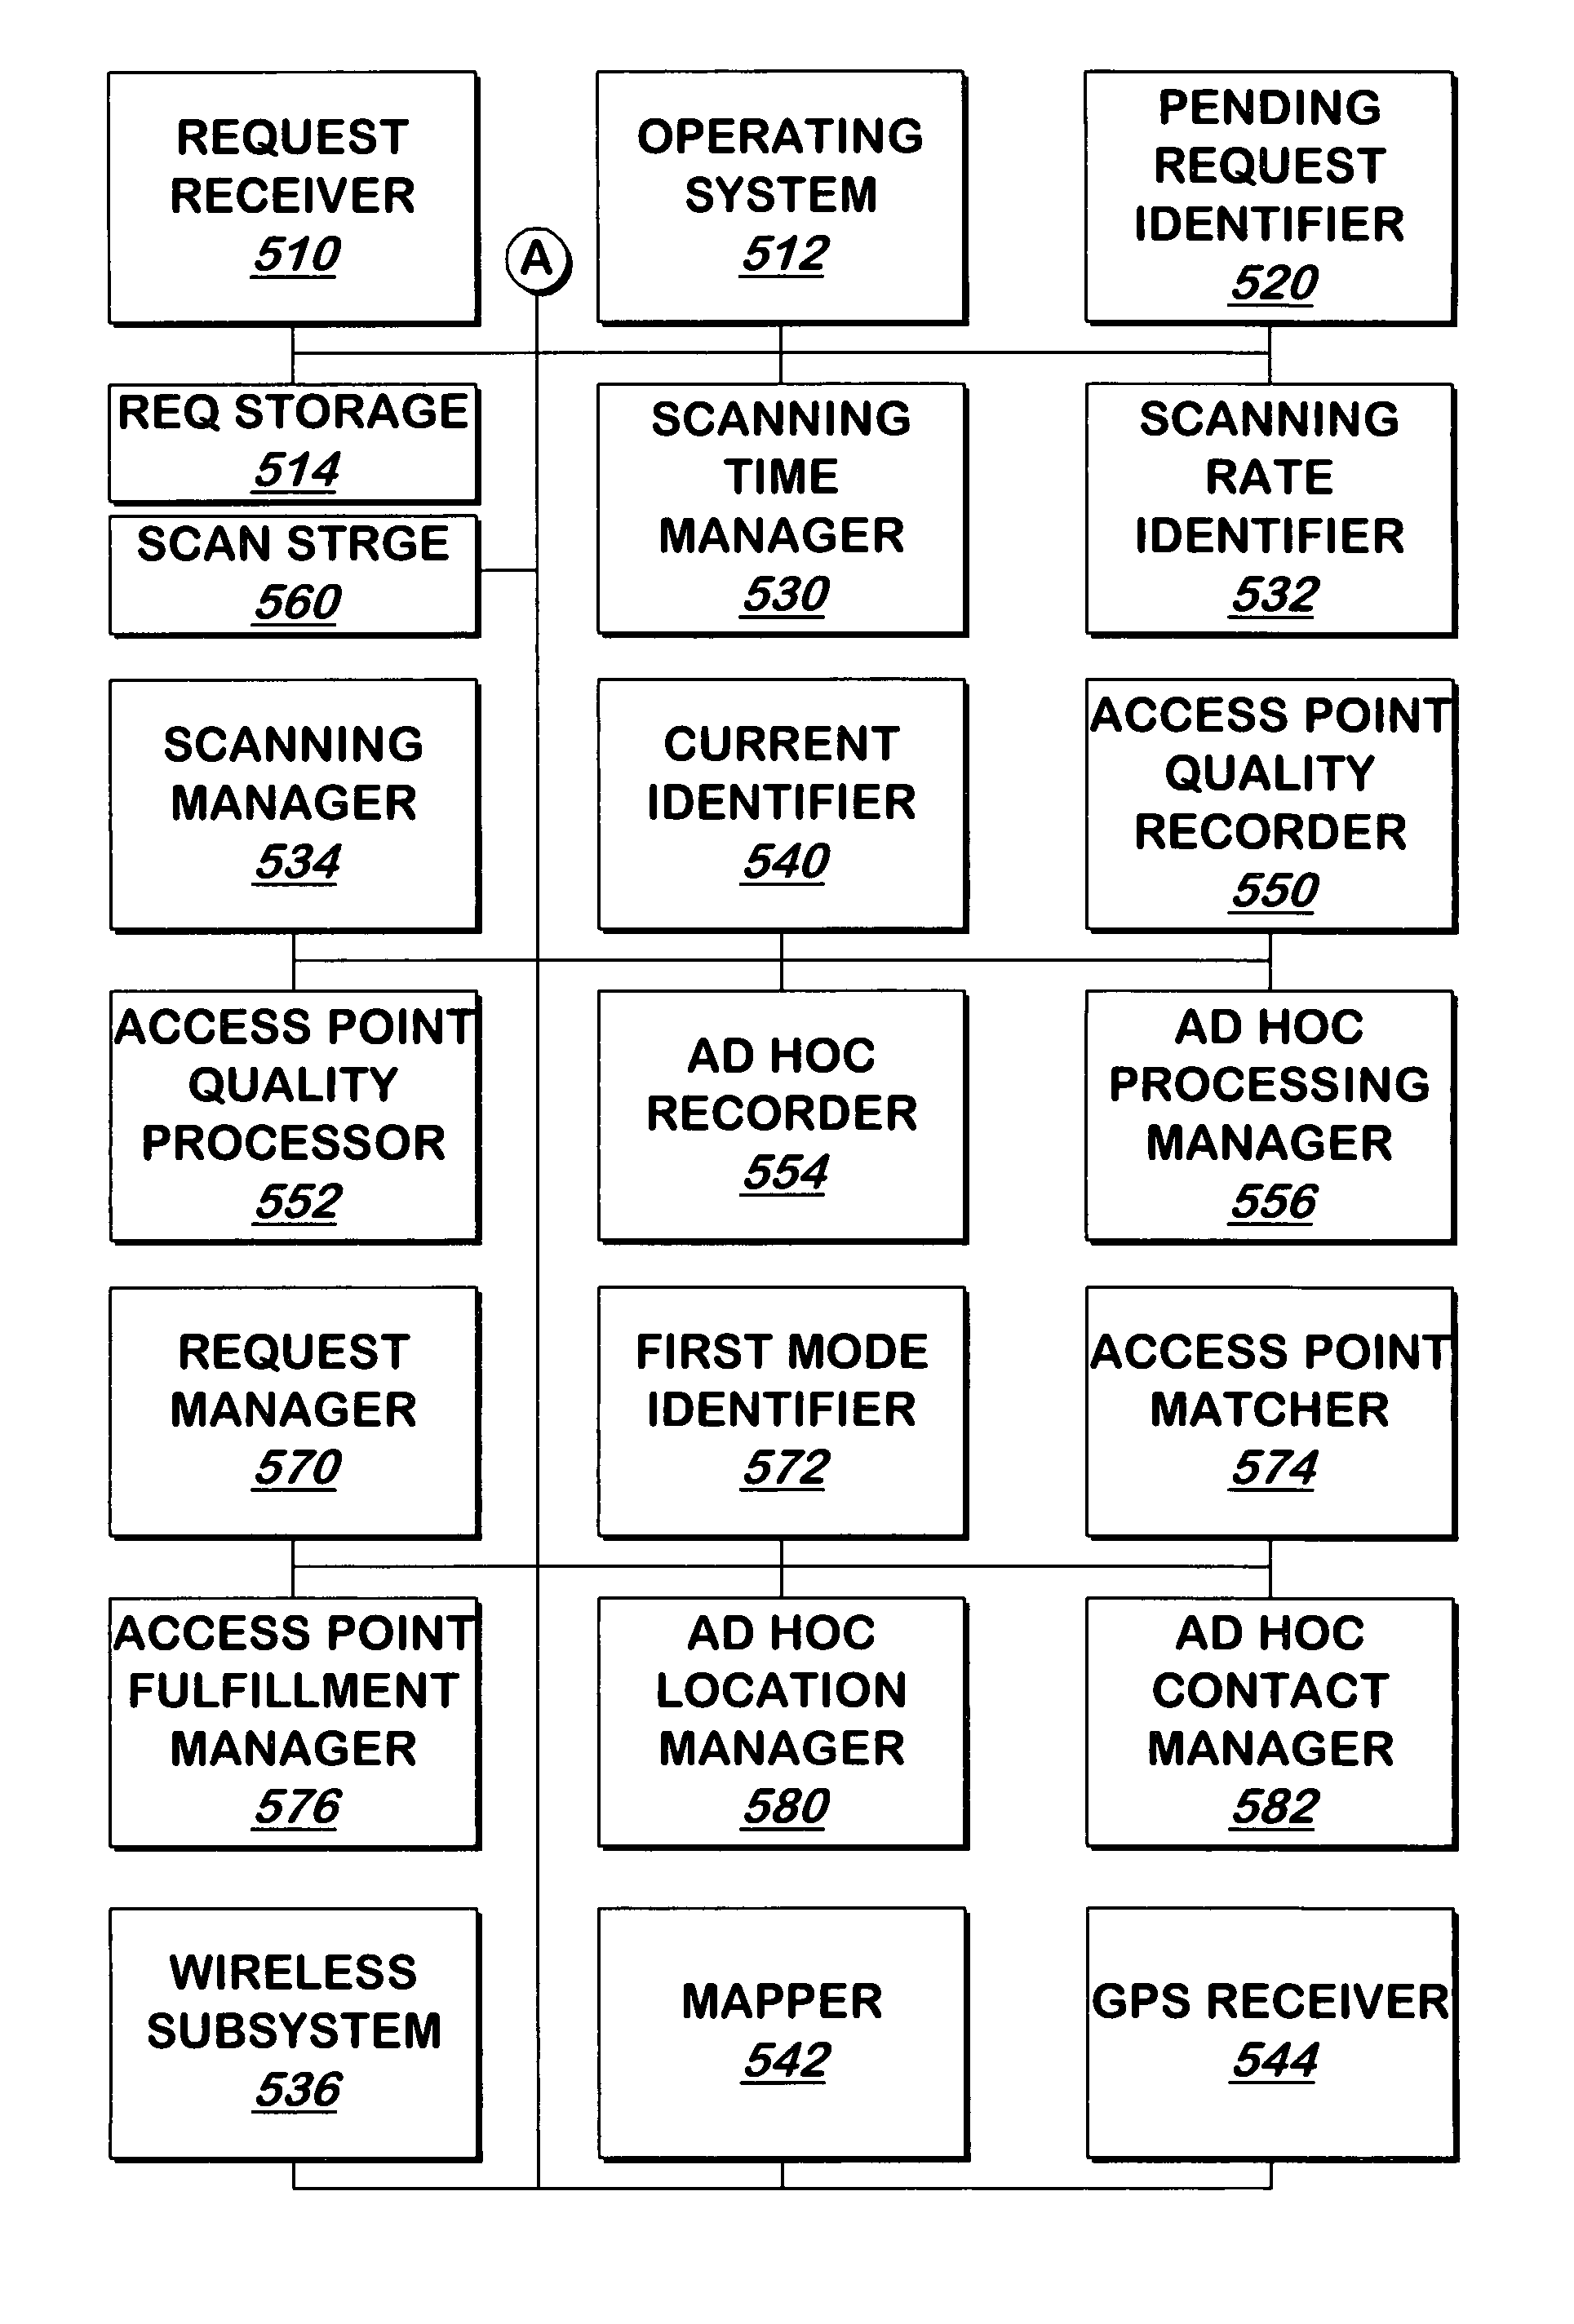 System and method for matching capabilities of access points with those required by an application